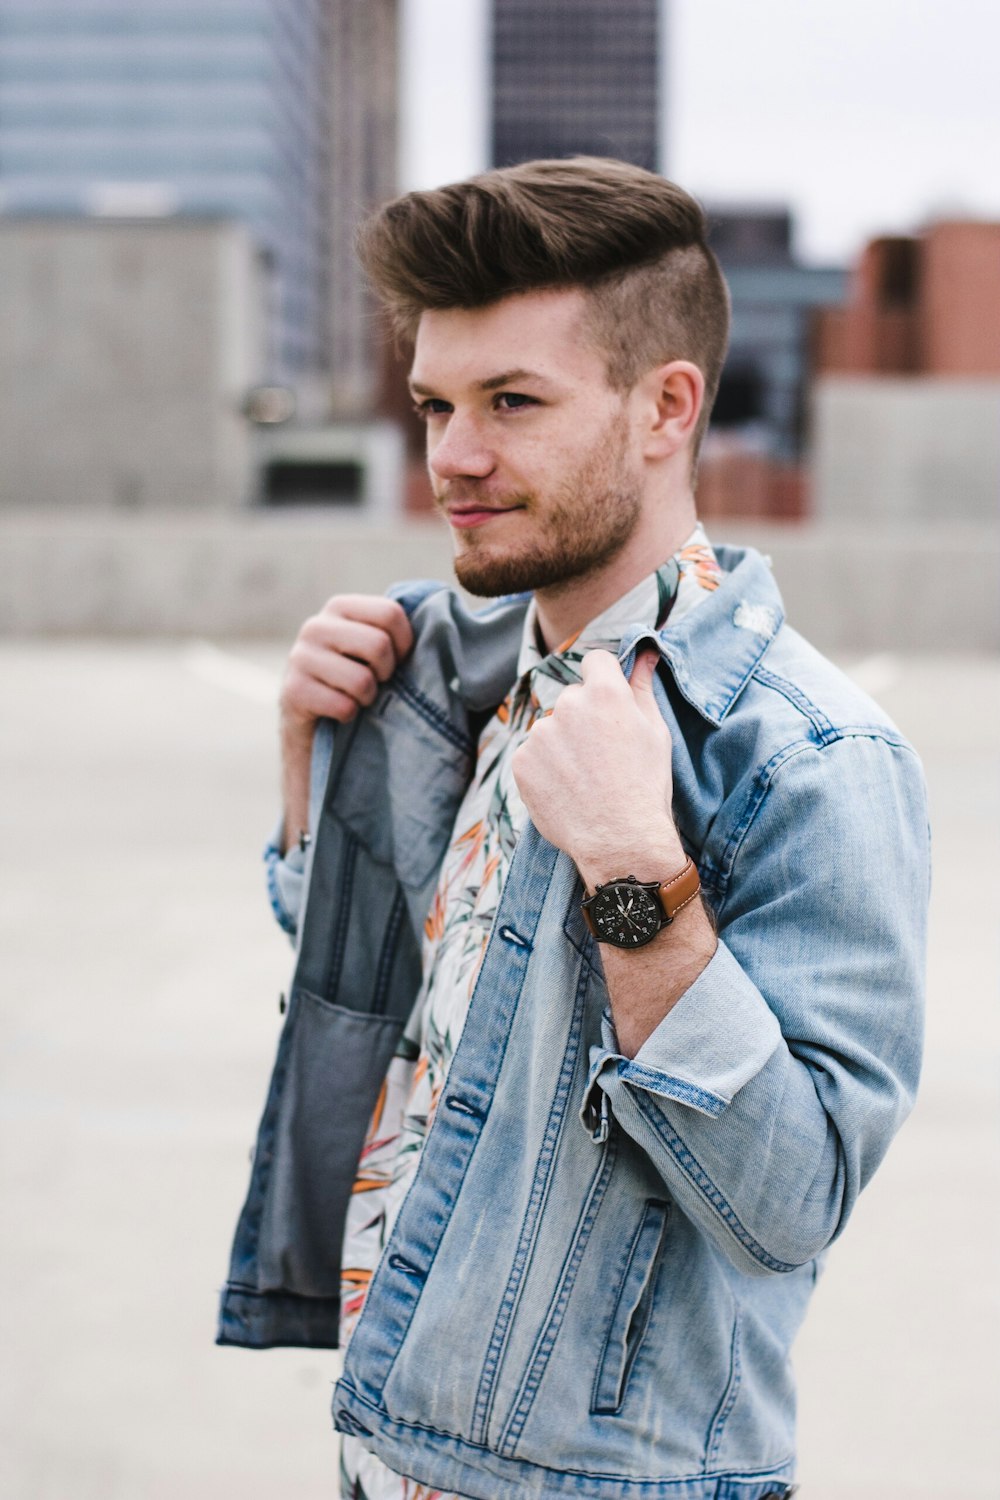 500+ Mens Fashion Pictures [HD] | Free Images on Unsplash